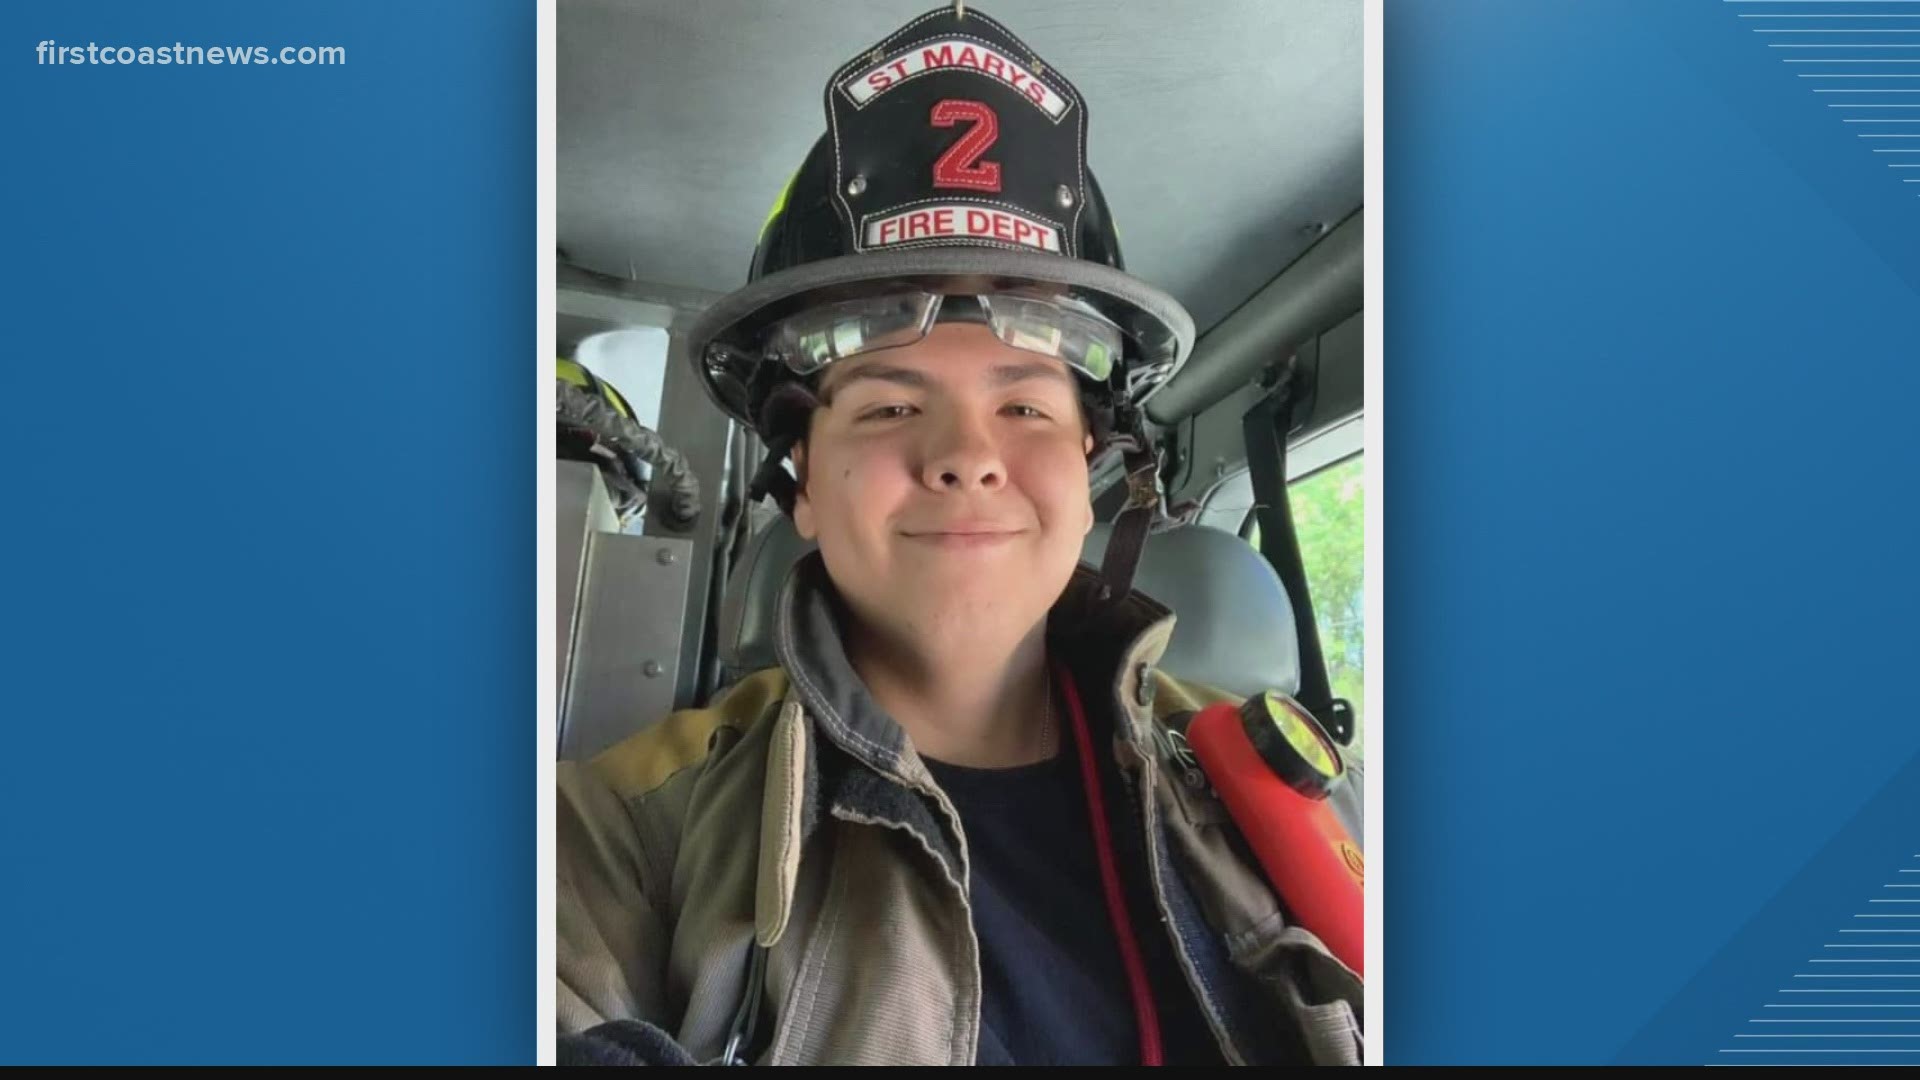 St. Marys firefighter who died in sleep during his first shift laid to